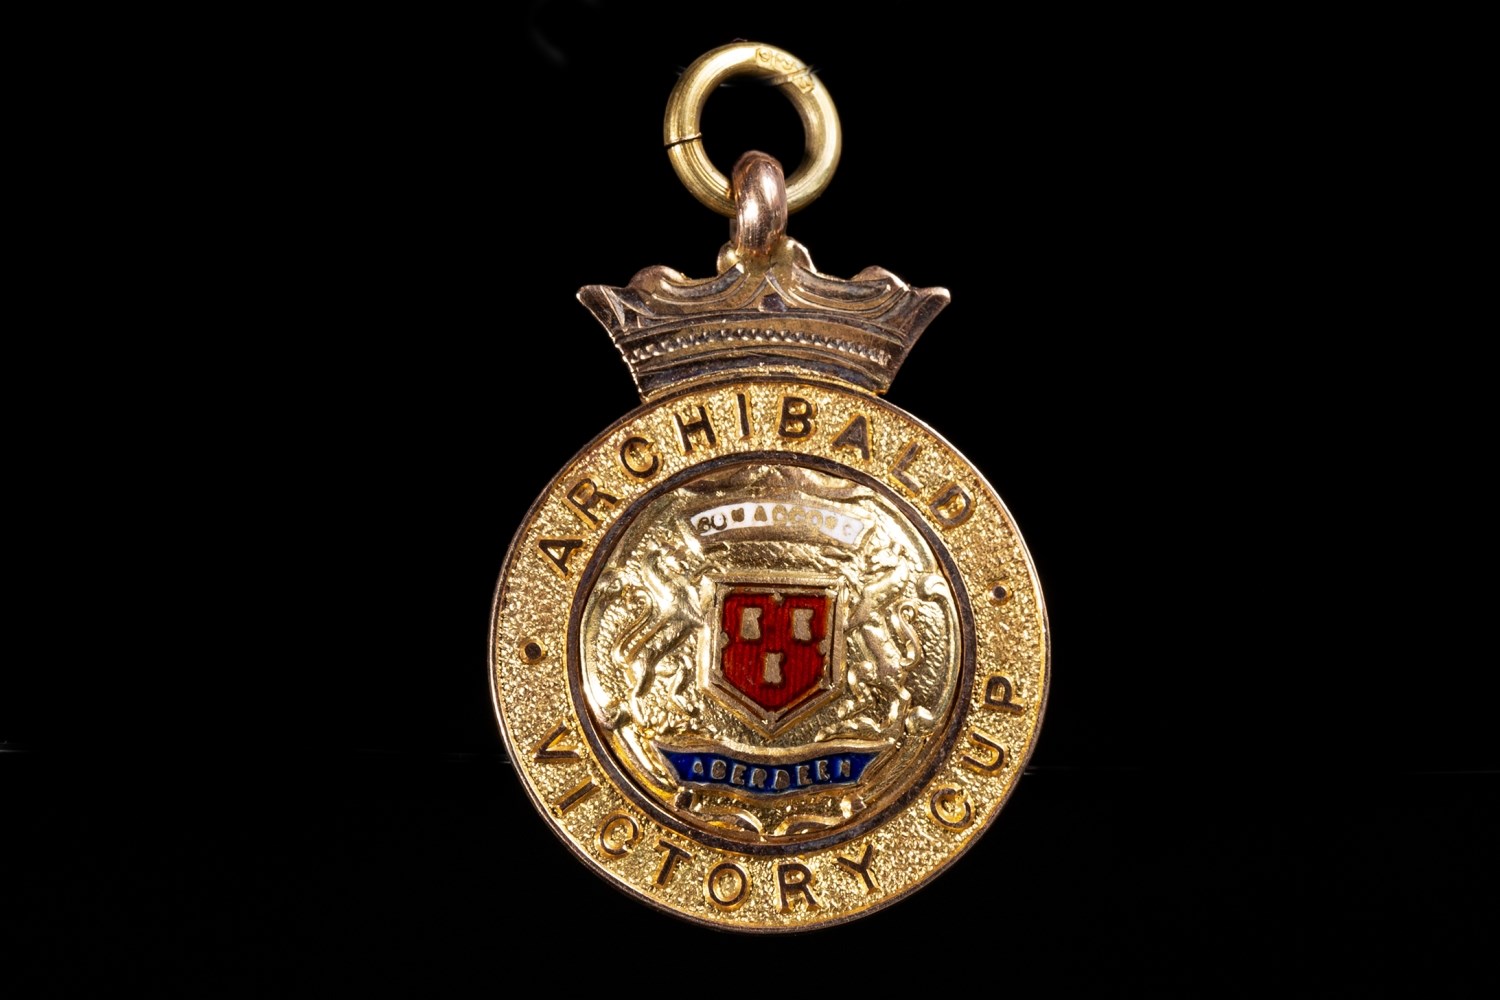 ARCHIBALD VICTORY CUP GOLD MEDAL 1926